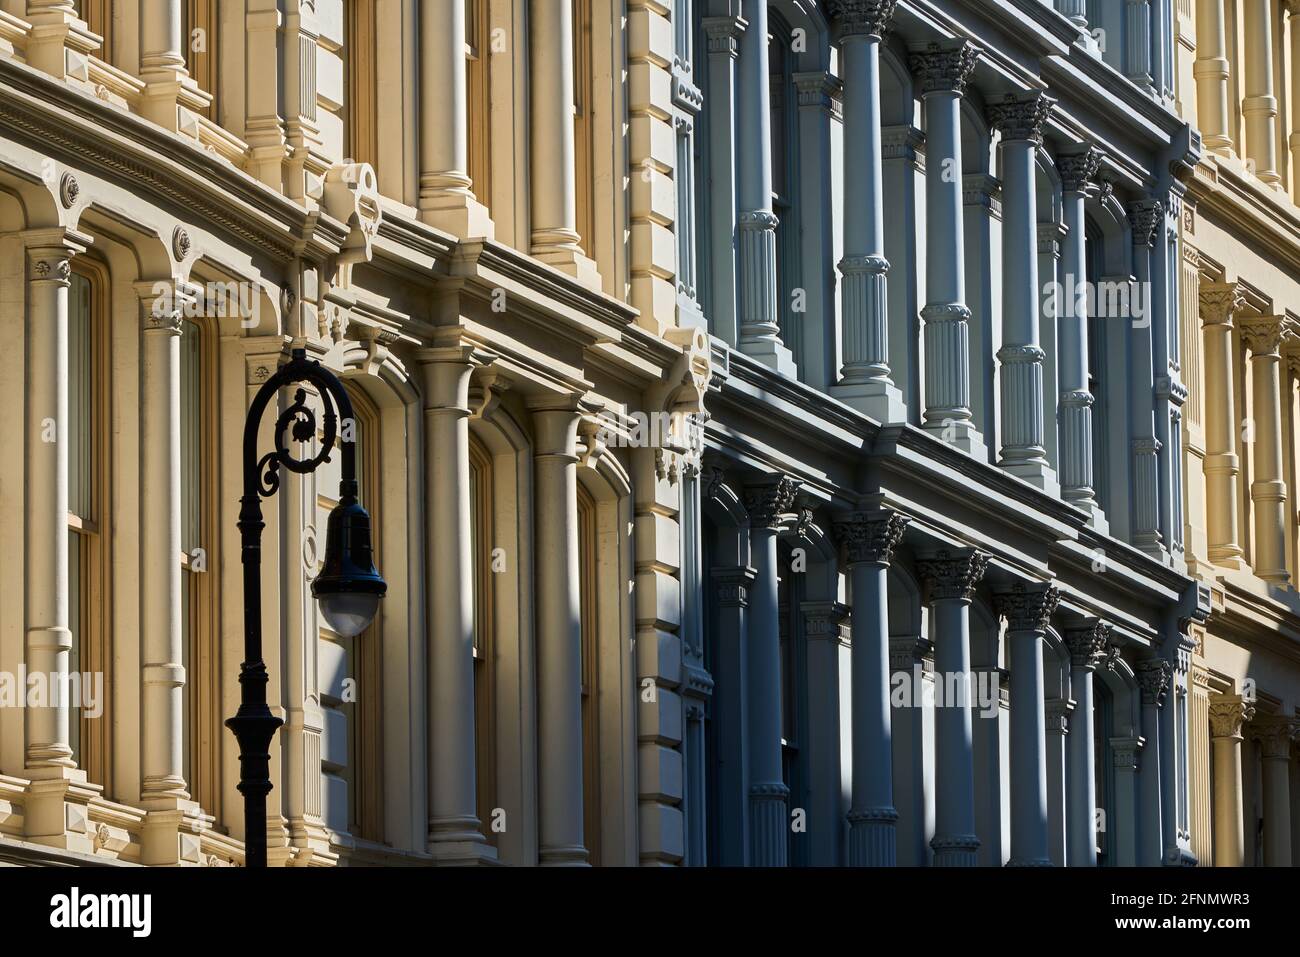 Typical building facades in SoHo, the Cast Iron Historic District with distinct late 19th century architecture. Lower Manhattan, New York City, USA Stock Photo